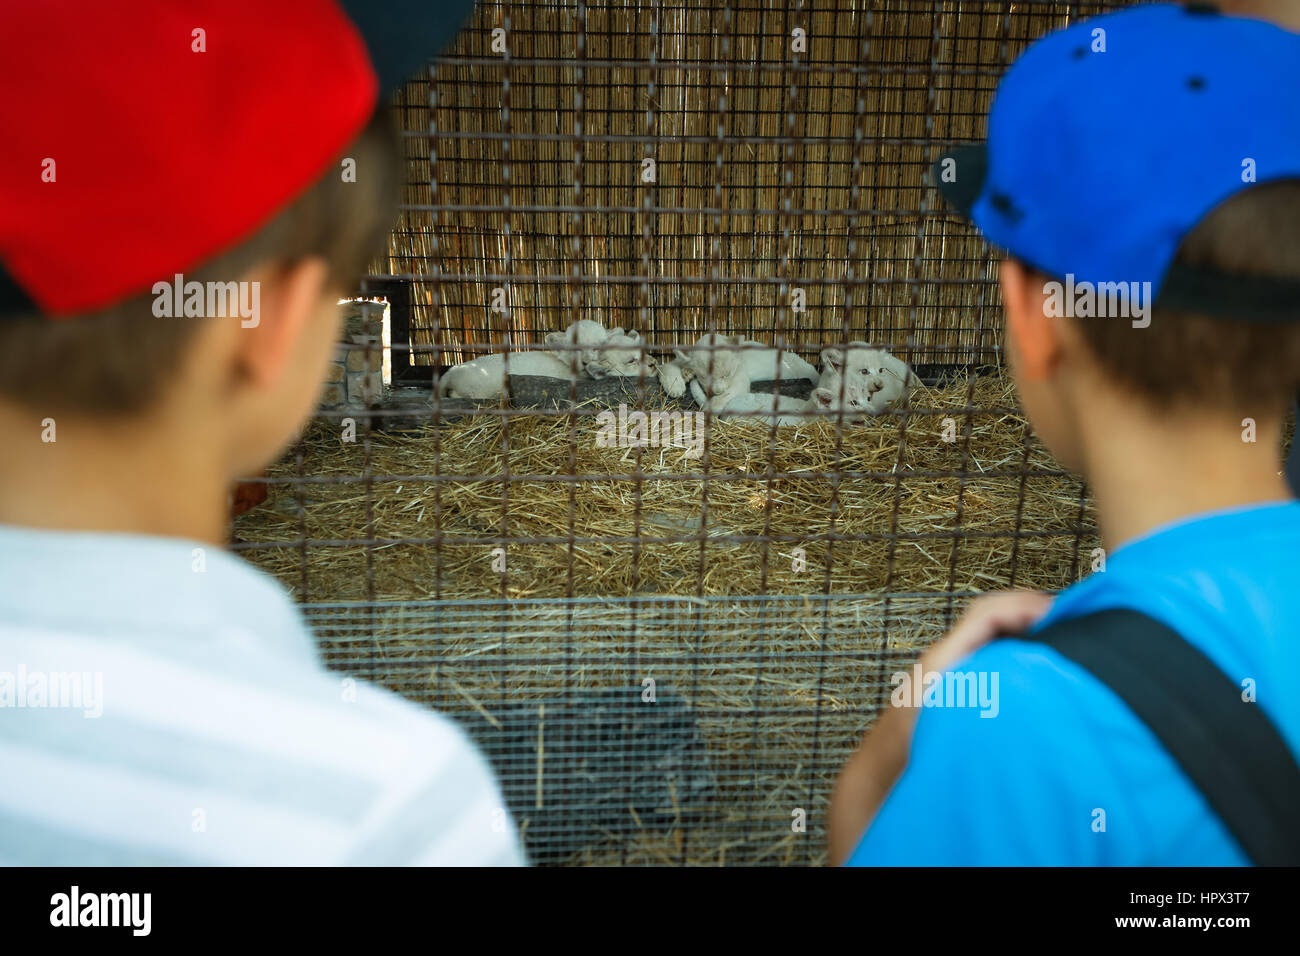 Demidov, Ukraine - August 11, 2016: Children watch the two-month white lion cubs born at the zoo Stock Photo